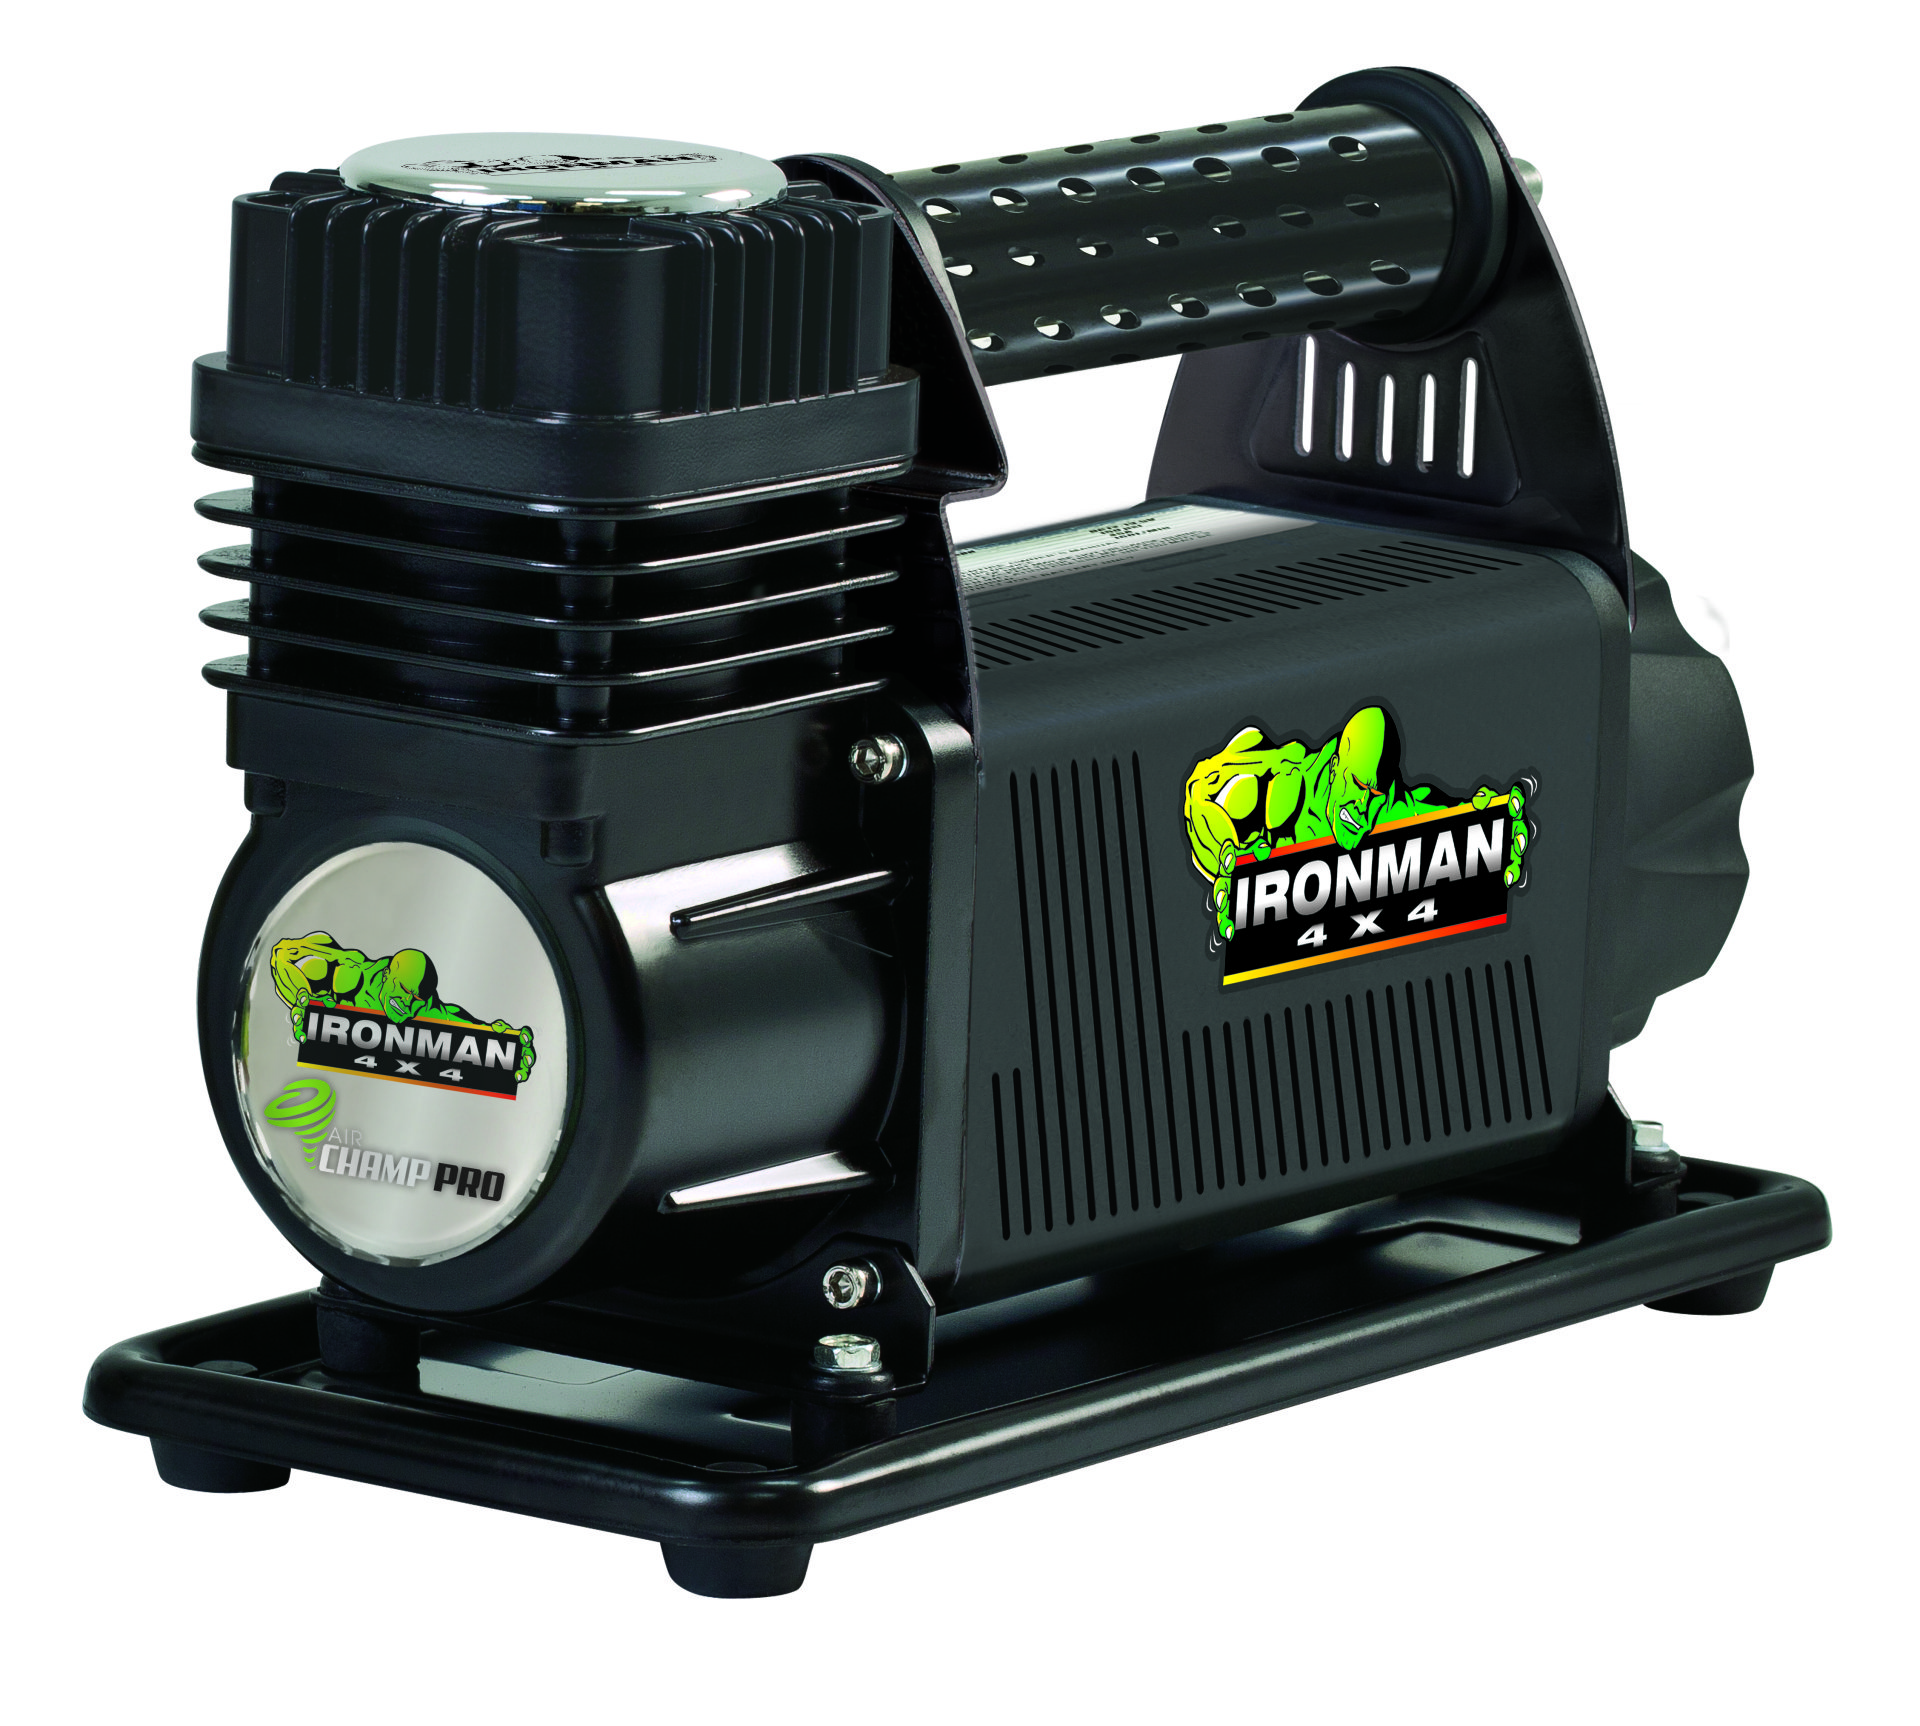 Ironman 4x4 Air Compressors and Accessories